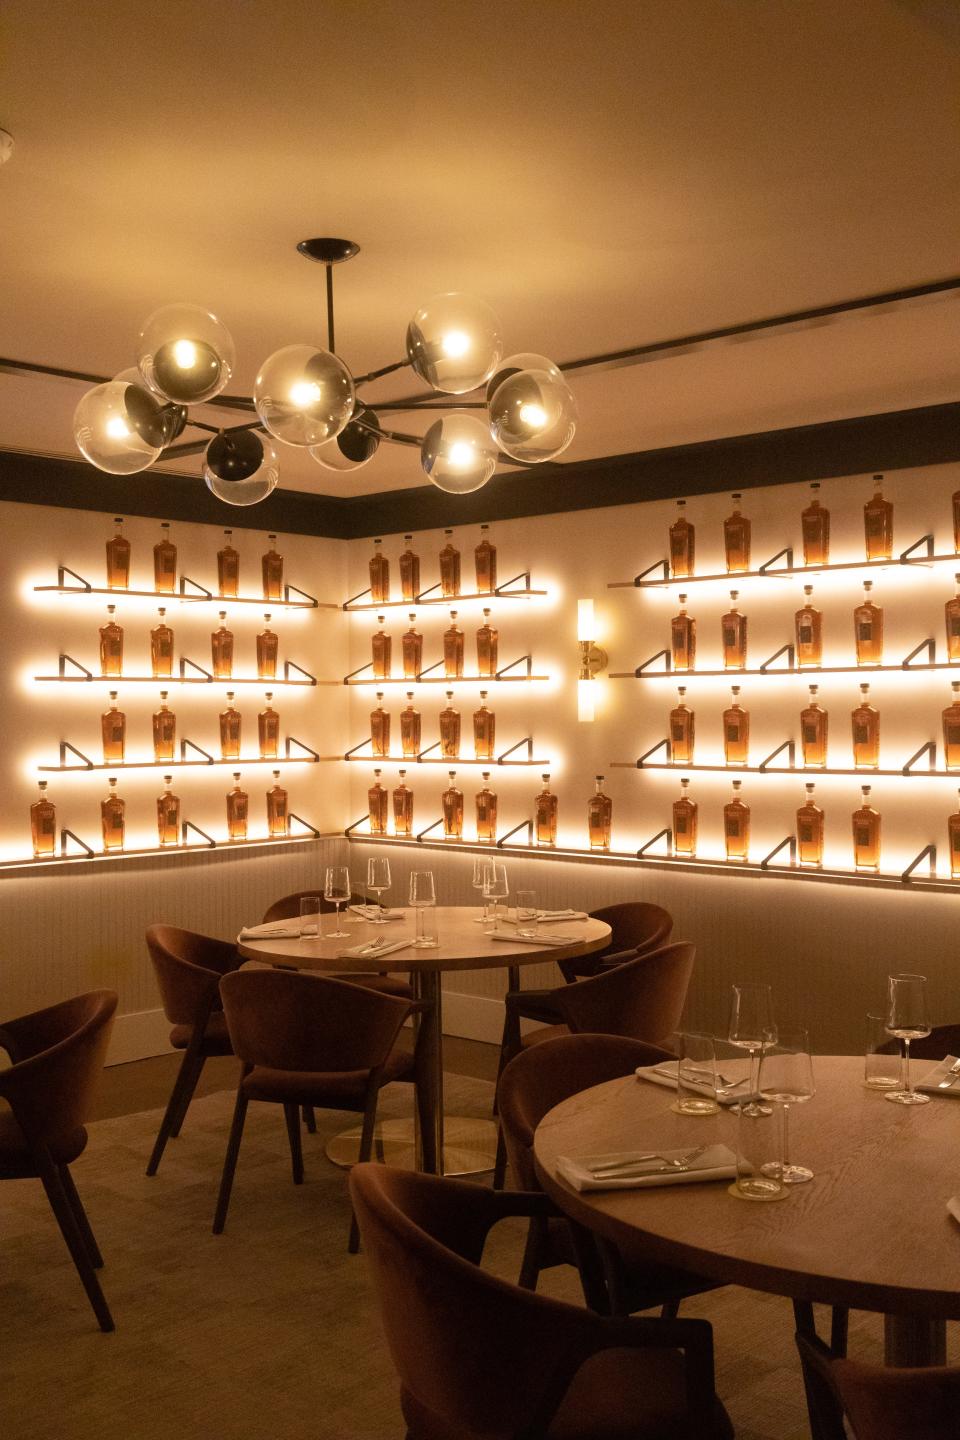 One of the dining rooms at Evelyn's in Nashville's Hutton Hotel features an eye-popping wall of the hotel's single barrel Heaven's door bourbon.